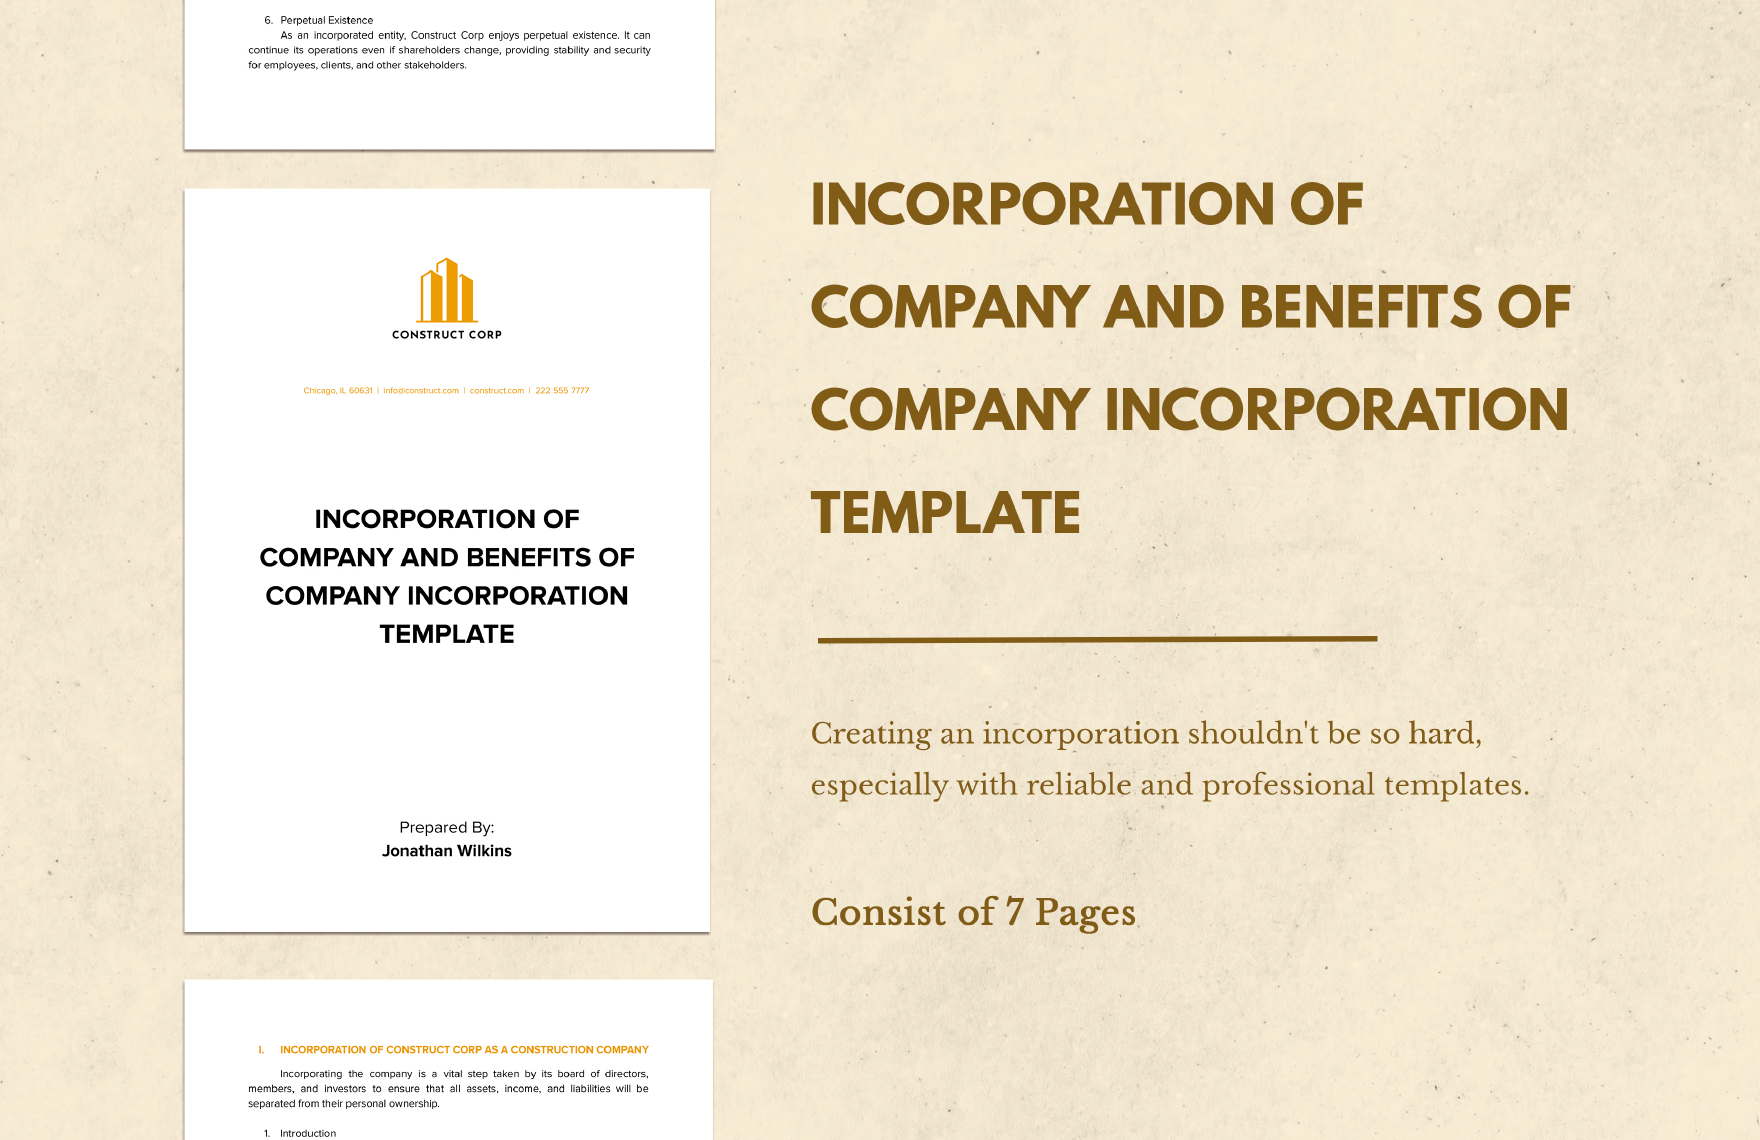 Incorporation of Company and Benefits of Company Incorporation